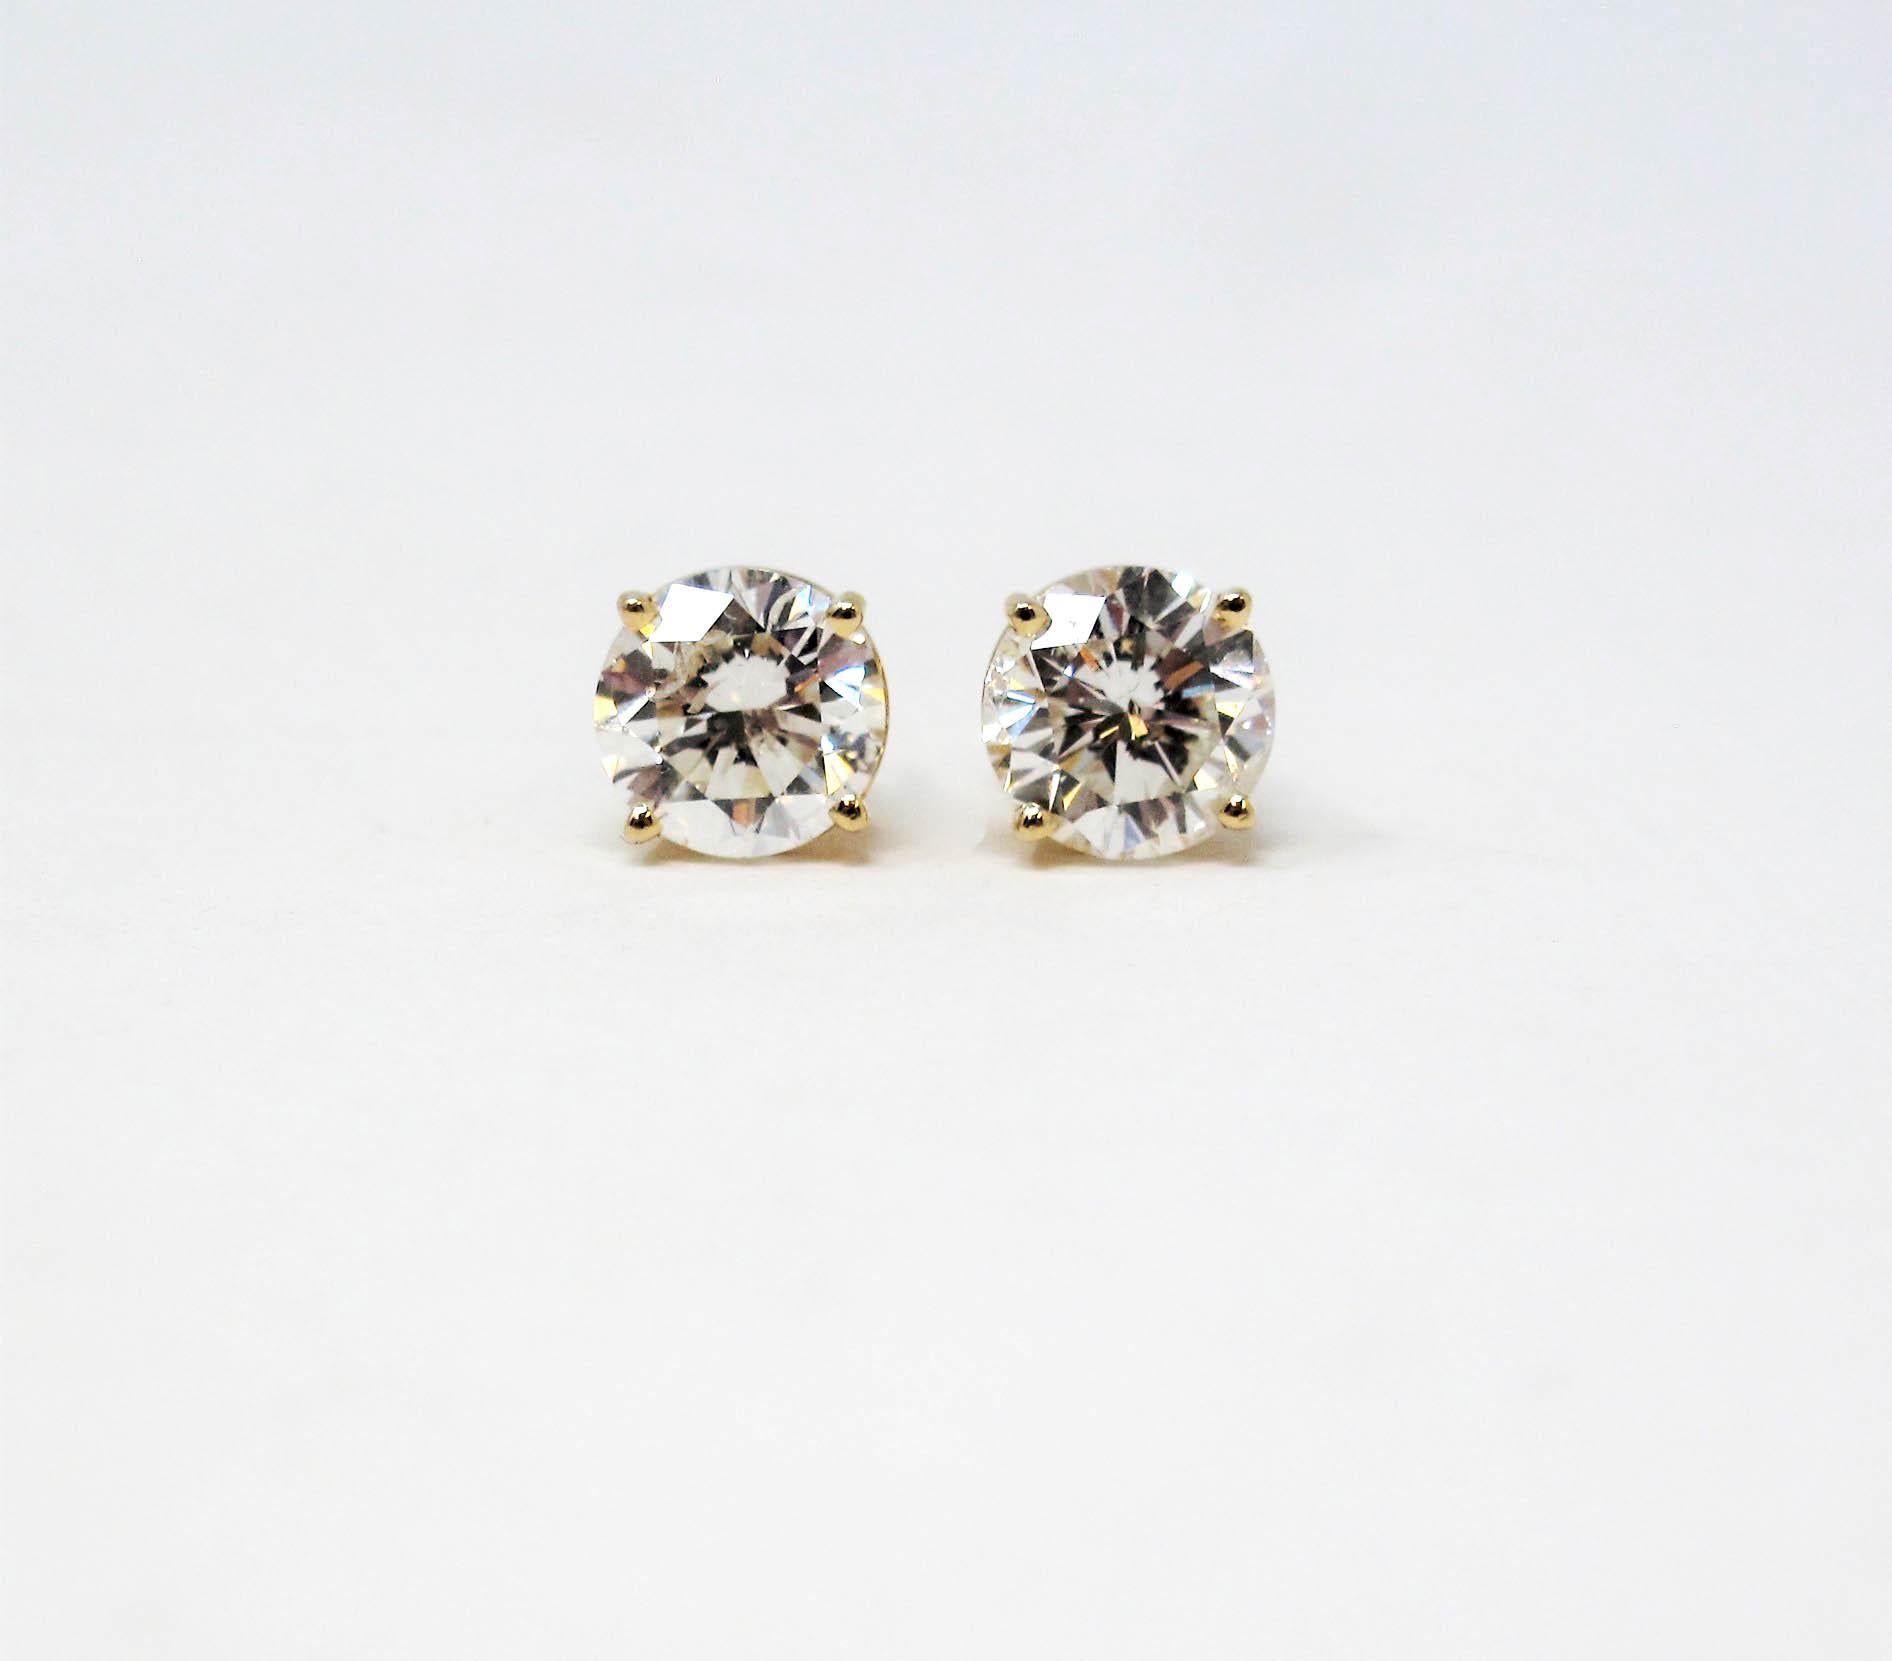 Meet your new go-to earring! These incredible, timeless diamond solitaire stud earrings are the absolute epitome of understated elegance. Classic in style, generous in size and bursting with sparkle, these earrings will truly stand the test of time.